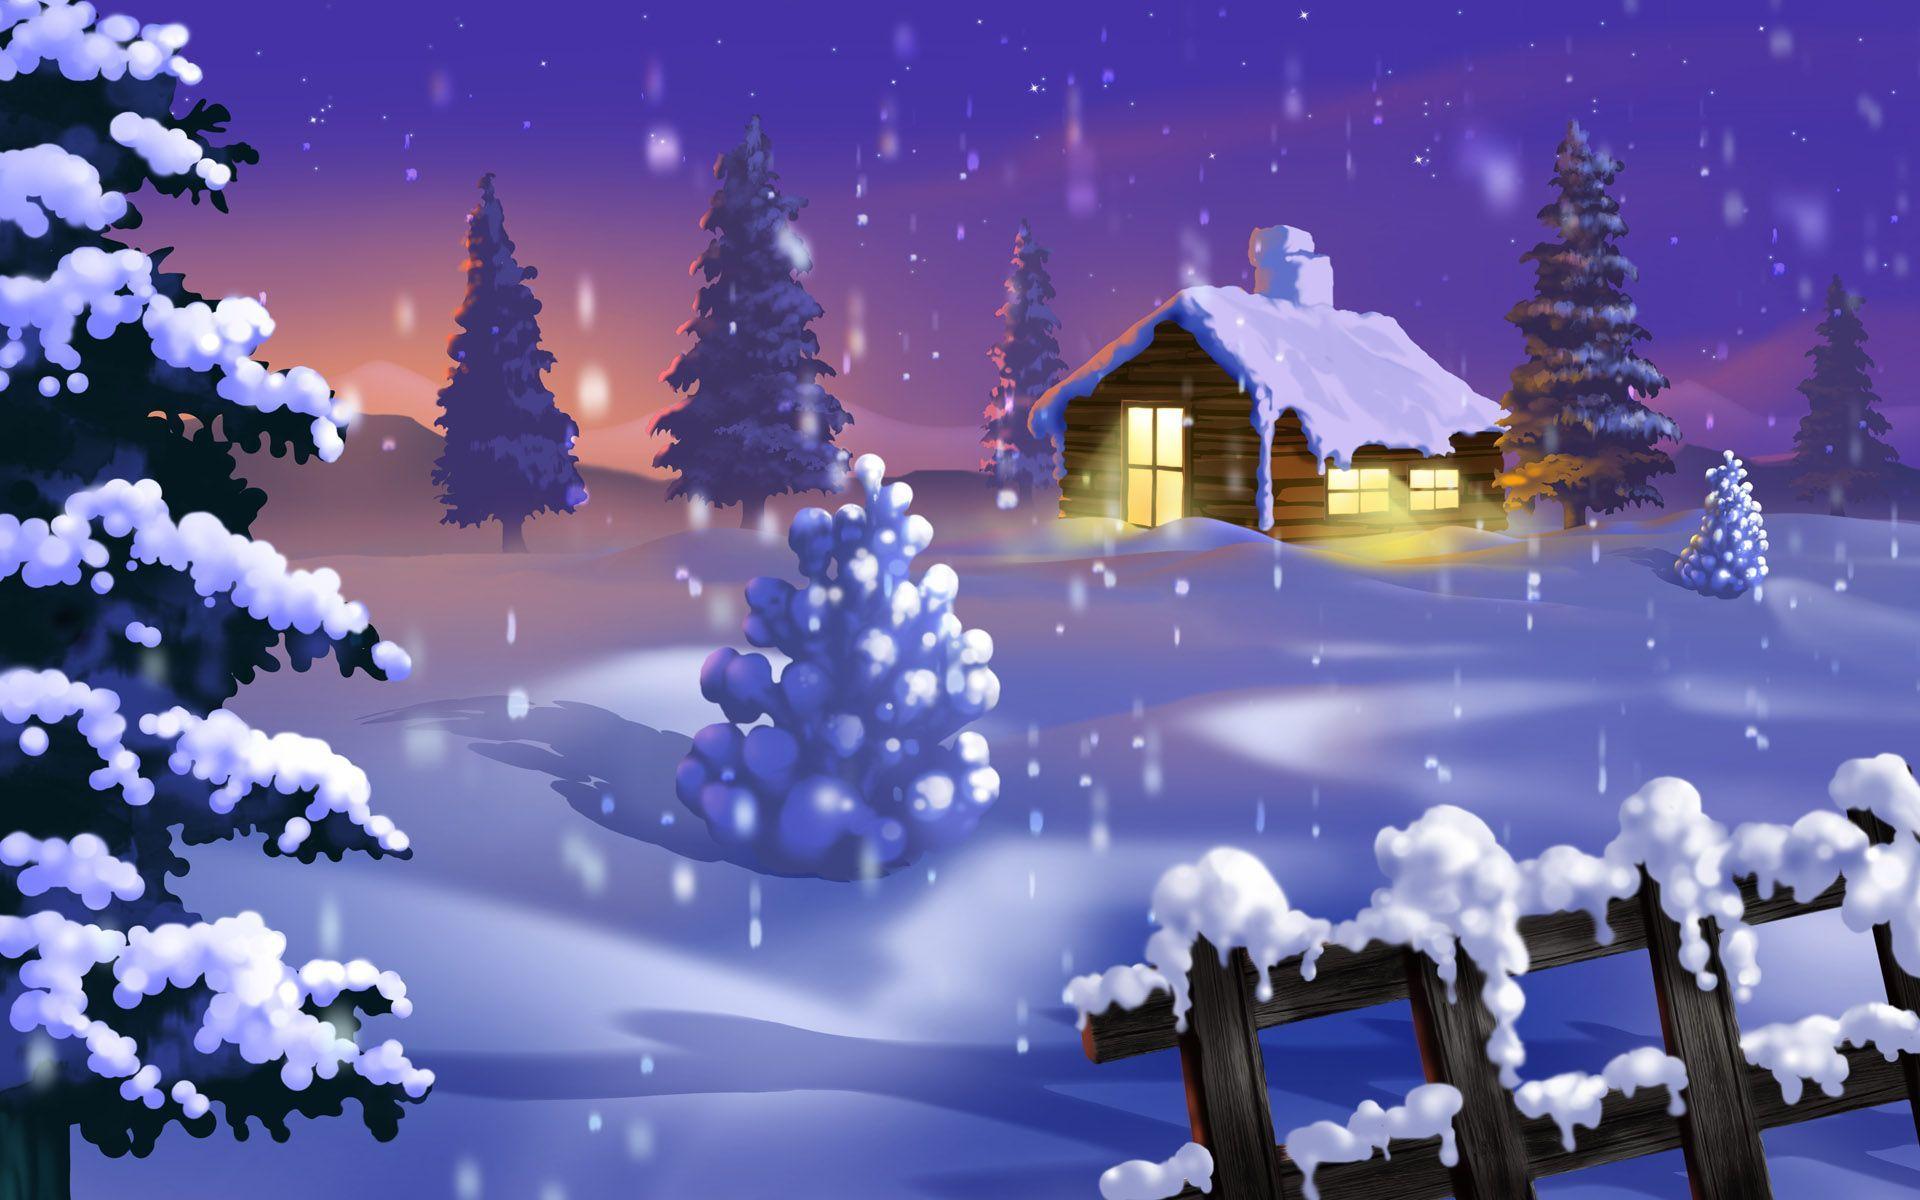 Cool Christmas and Winter Wallpaper For Your Desktop